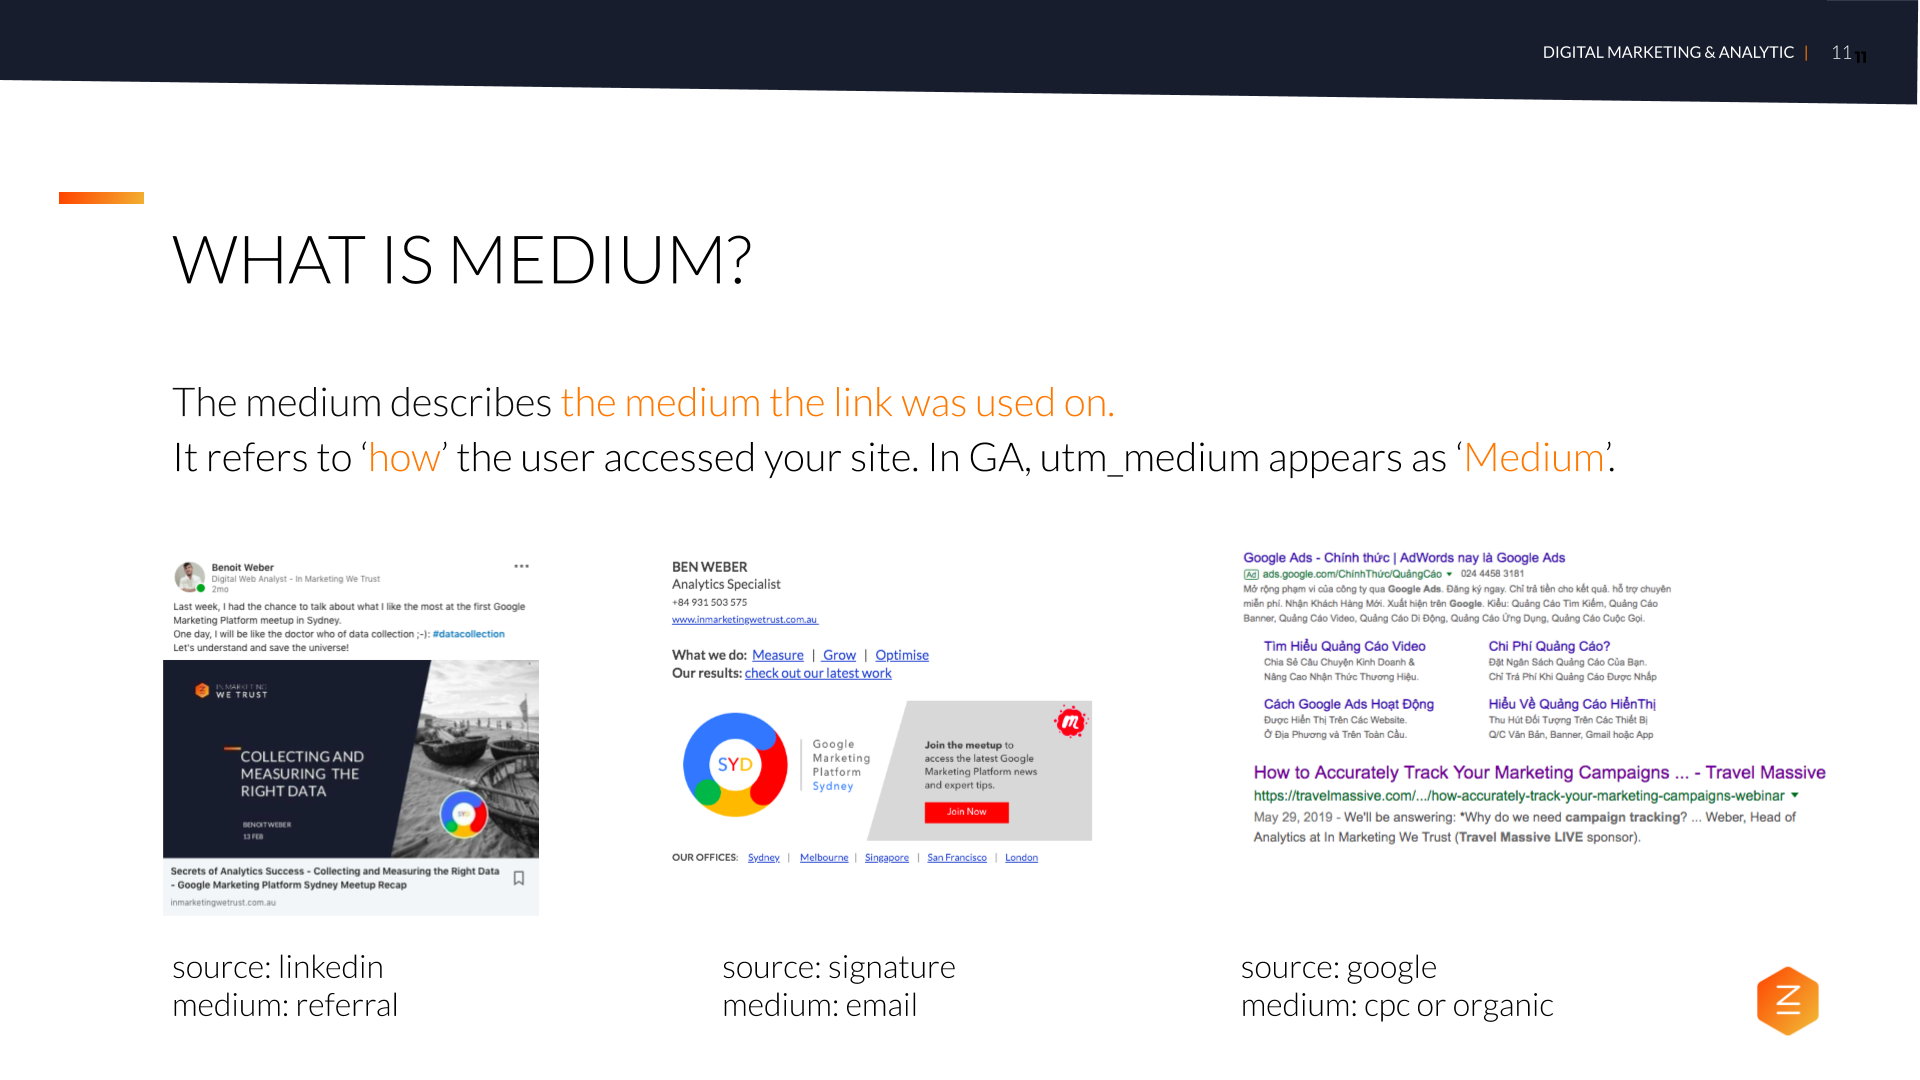 What is medium - How to Accurately Track Marketing Campaigns in Google Analytics